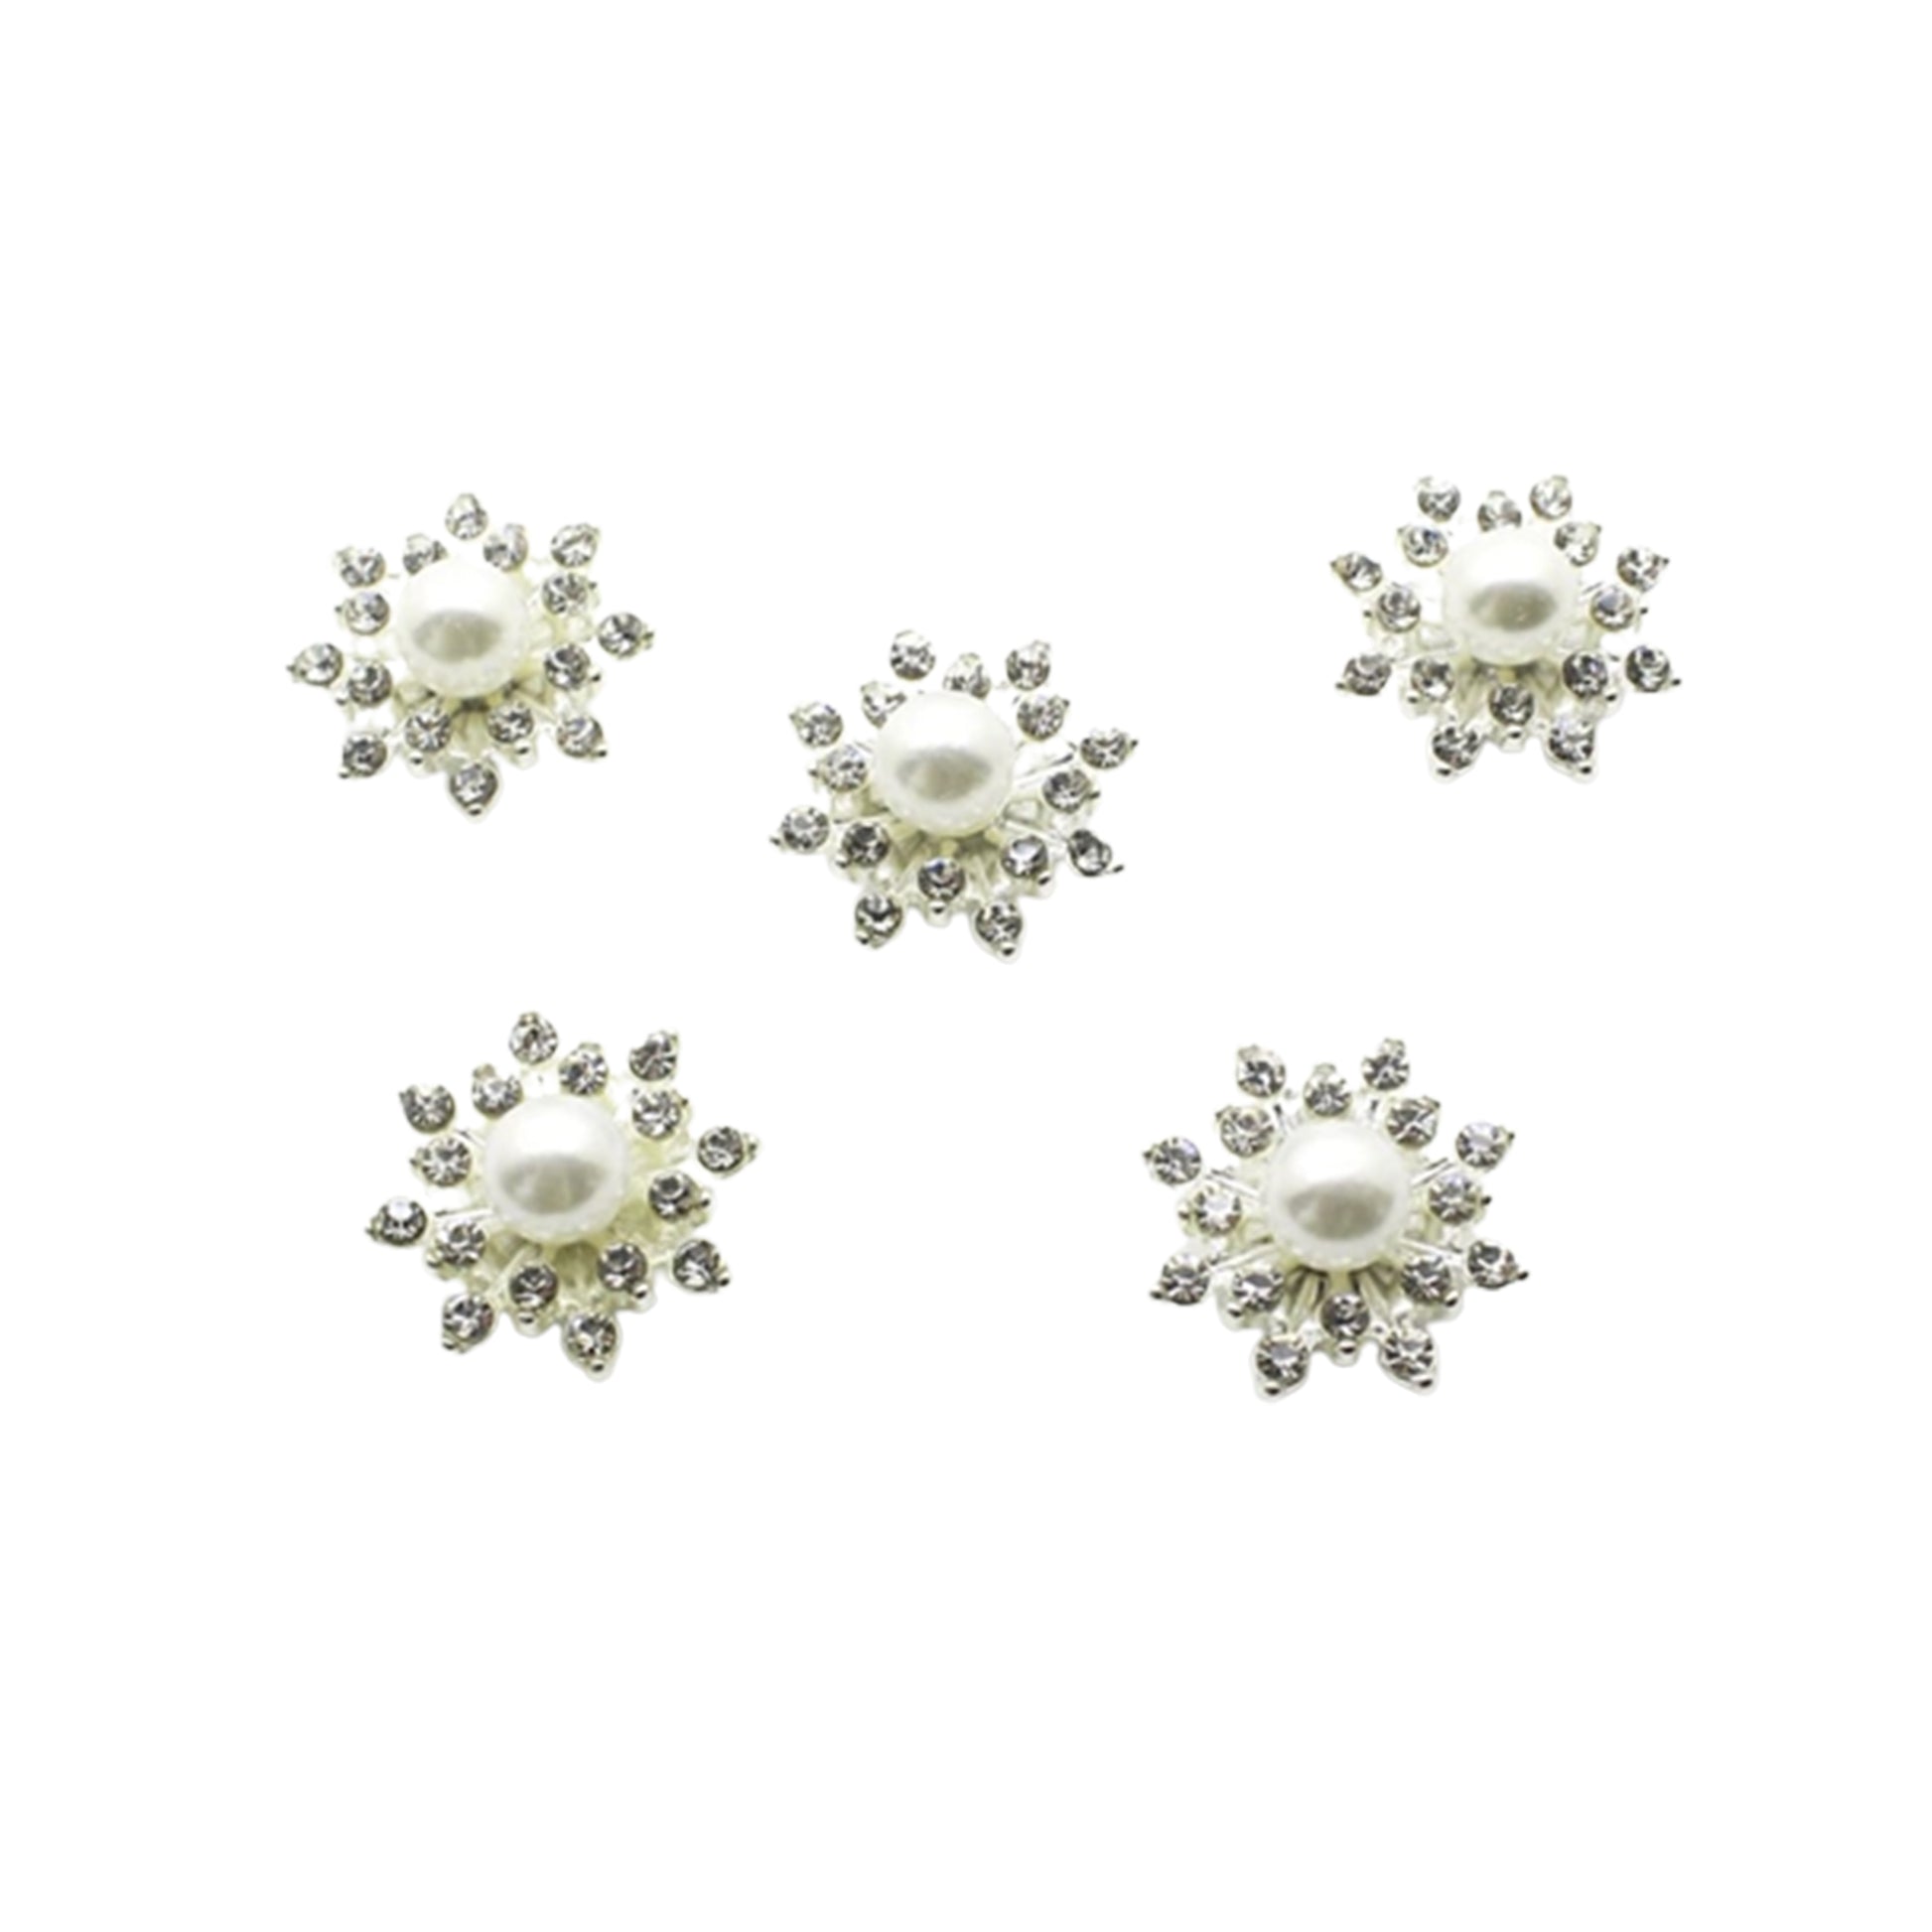 5pcs 16mm Alloy Pearl Buttons Rhinestone Buttons for Clothing Snap Flat Back Fabric Buttons for Wedding Hair Tie Decorative